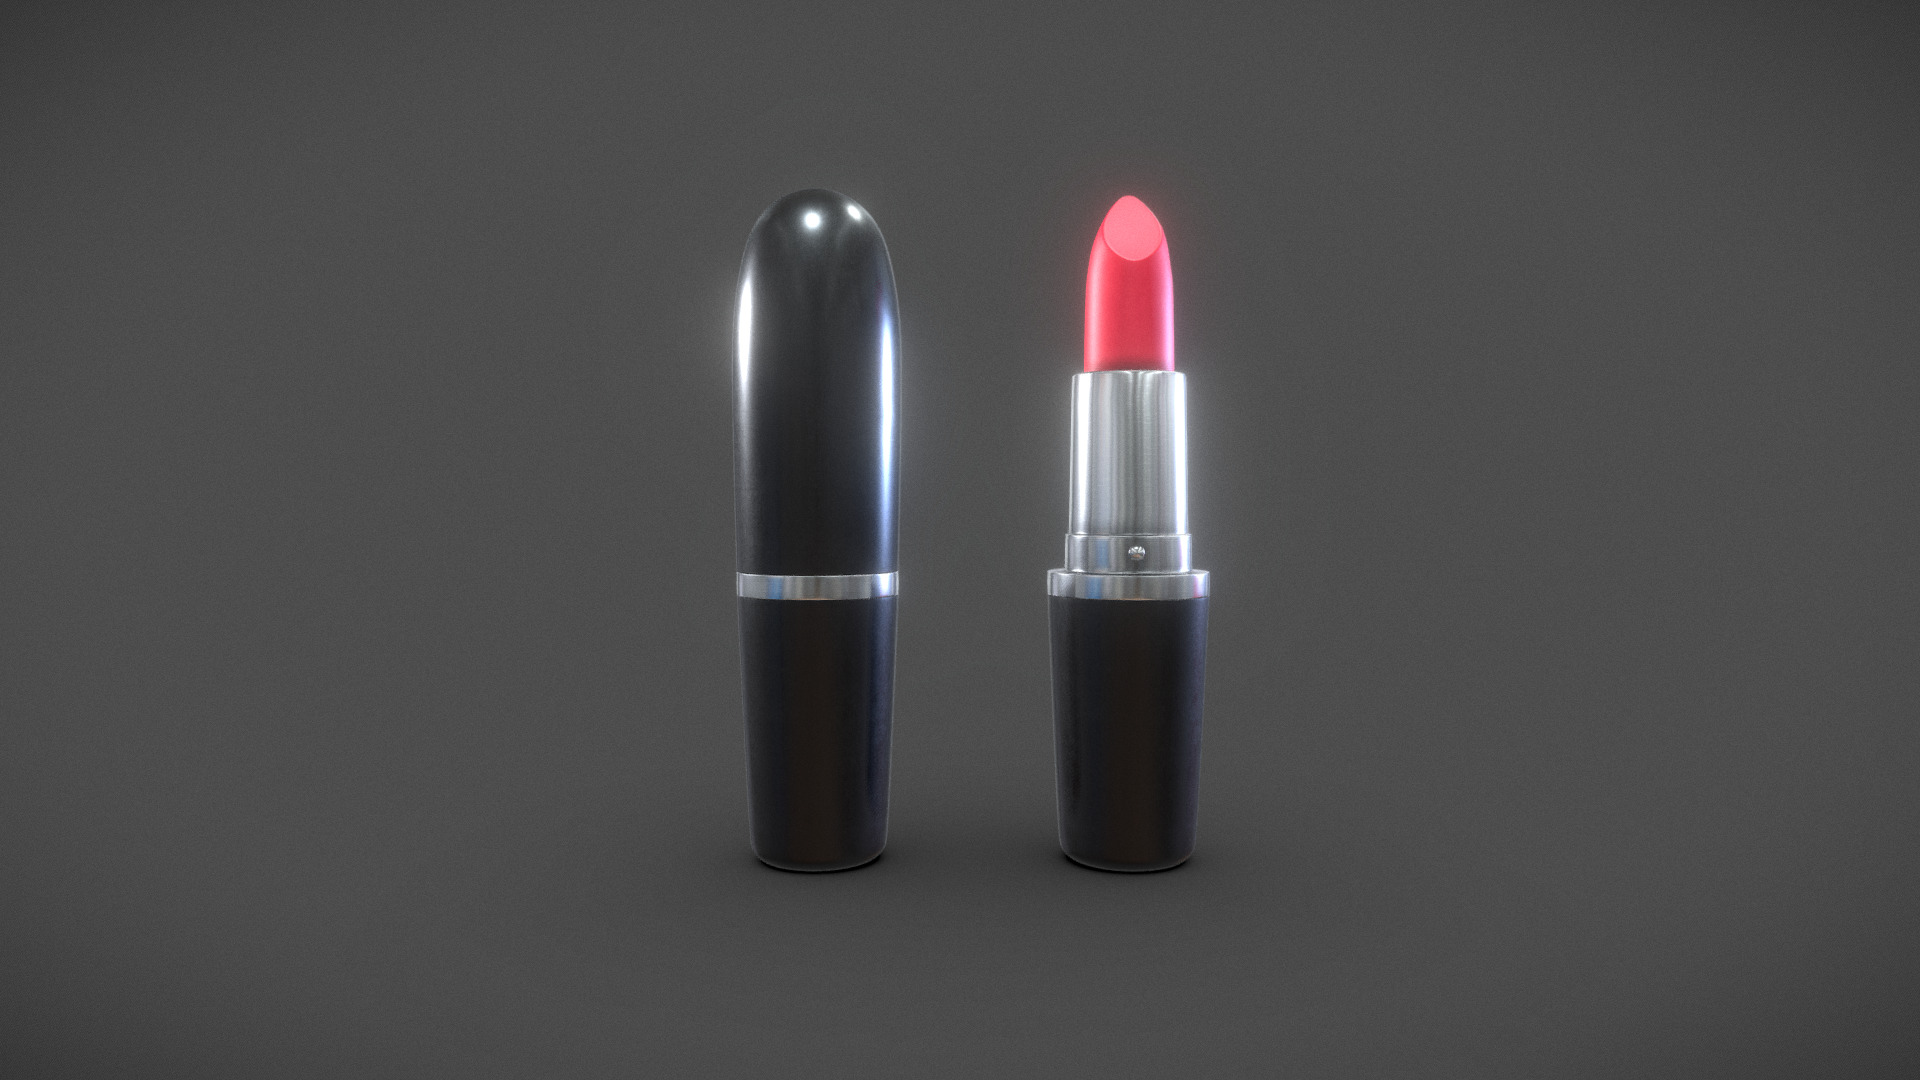 This 3D model inspired by MAC Cosmetics is available on Adobe Stock marketplace and is optimized for Adobe Dimension CC 3d model